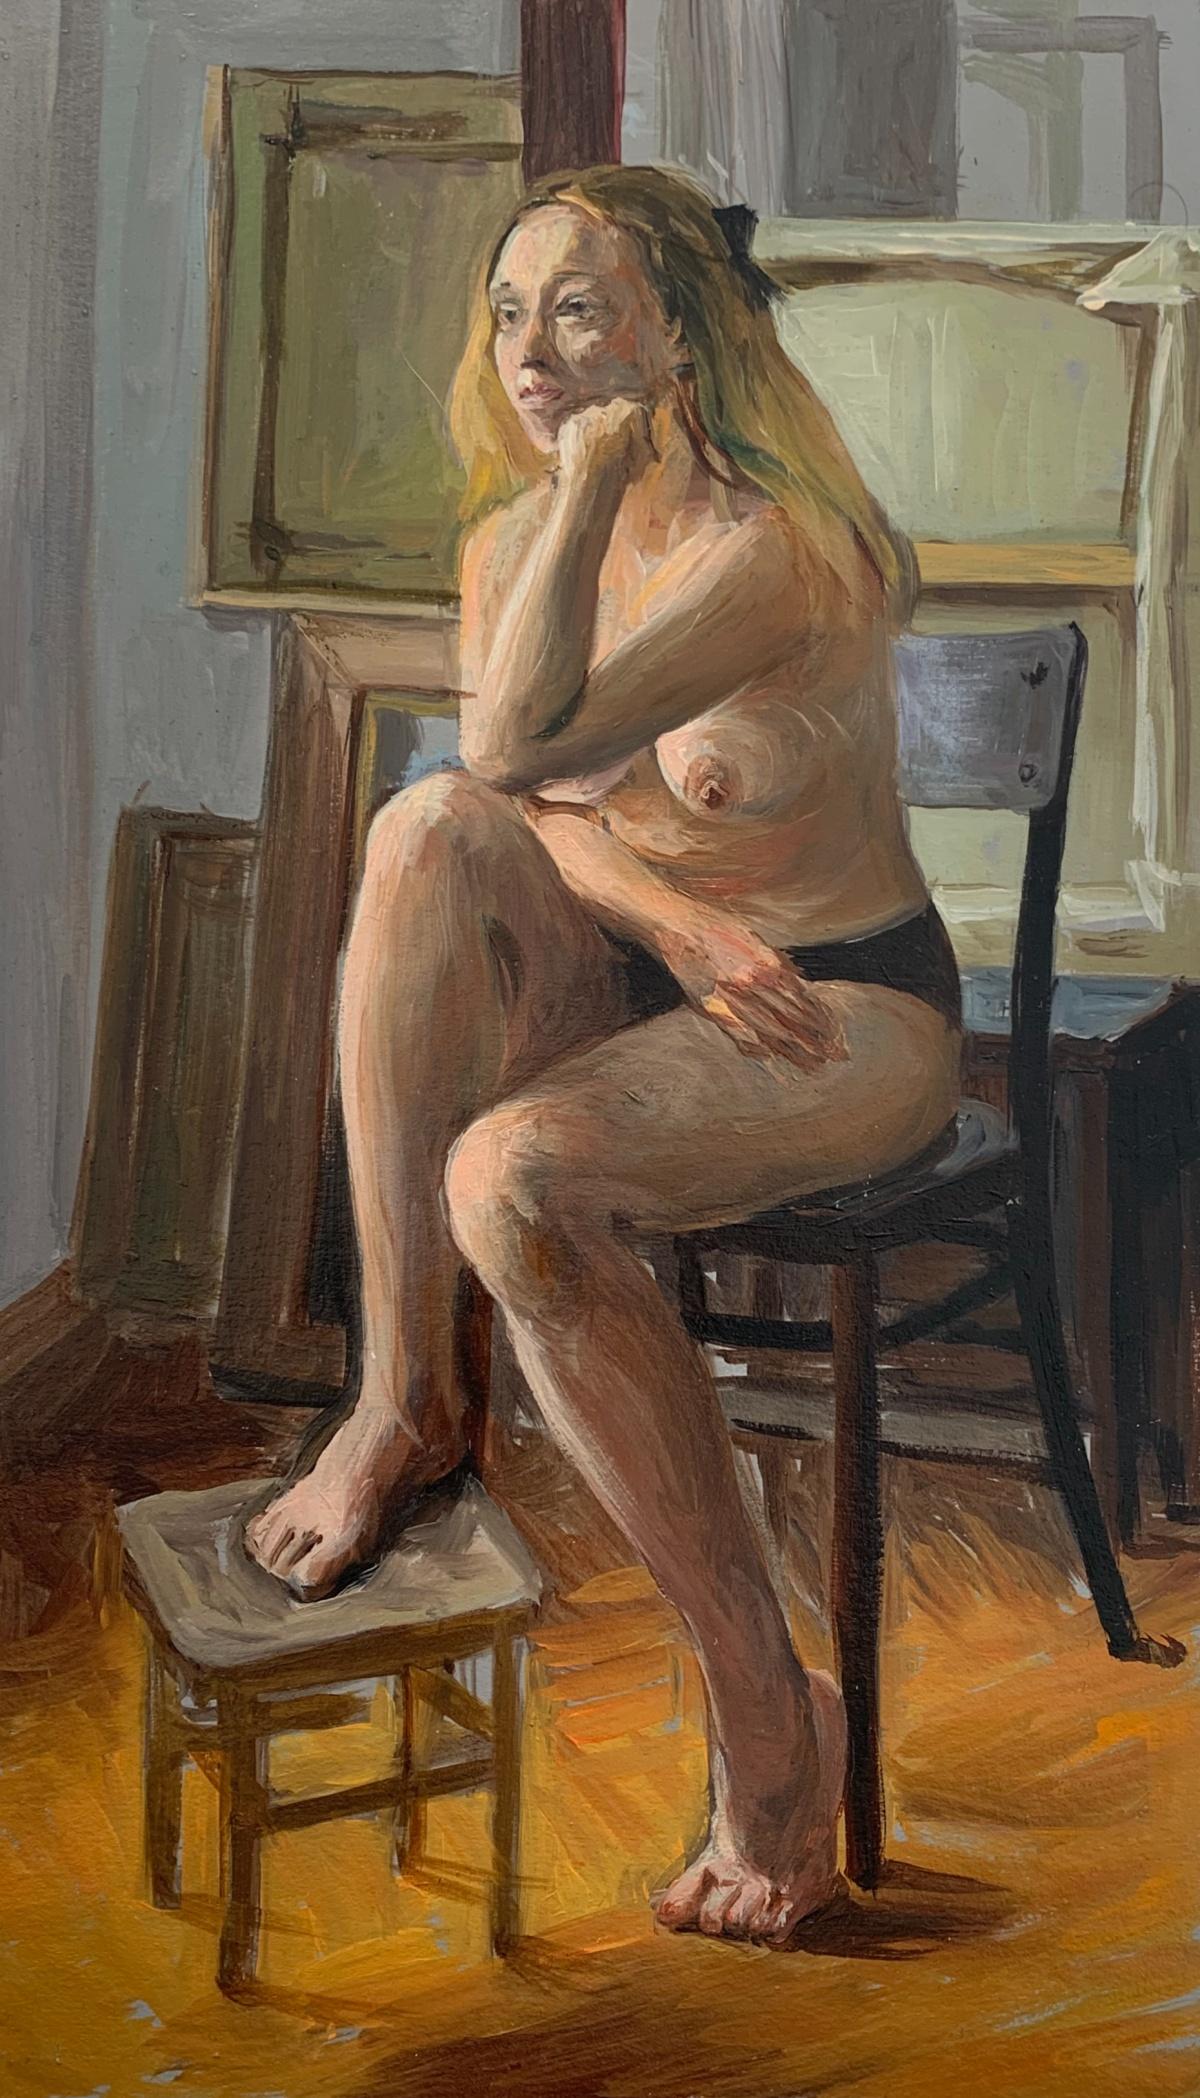 Agnieszka Staak-Janczarska Nude Painting - A sitter - Realistic oil painting, Female nude, Warm tones, Young Polish artist